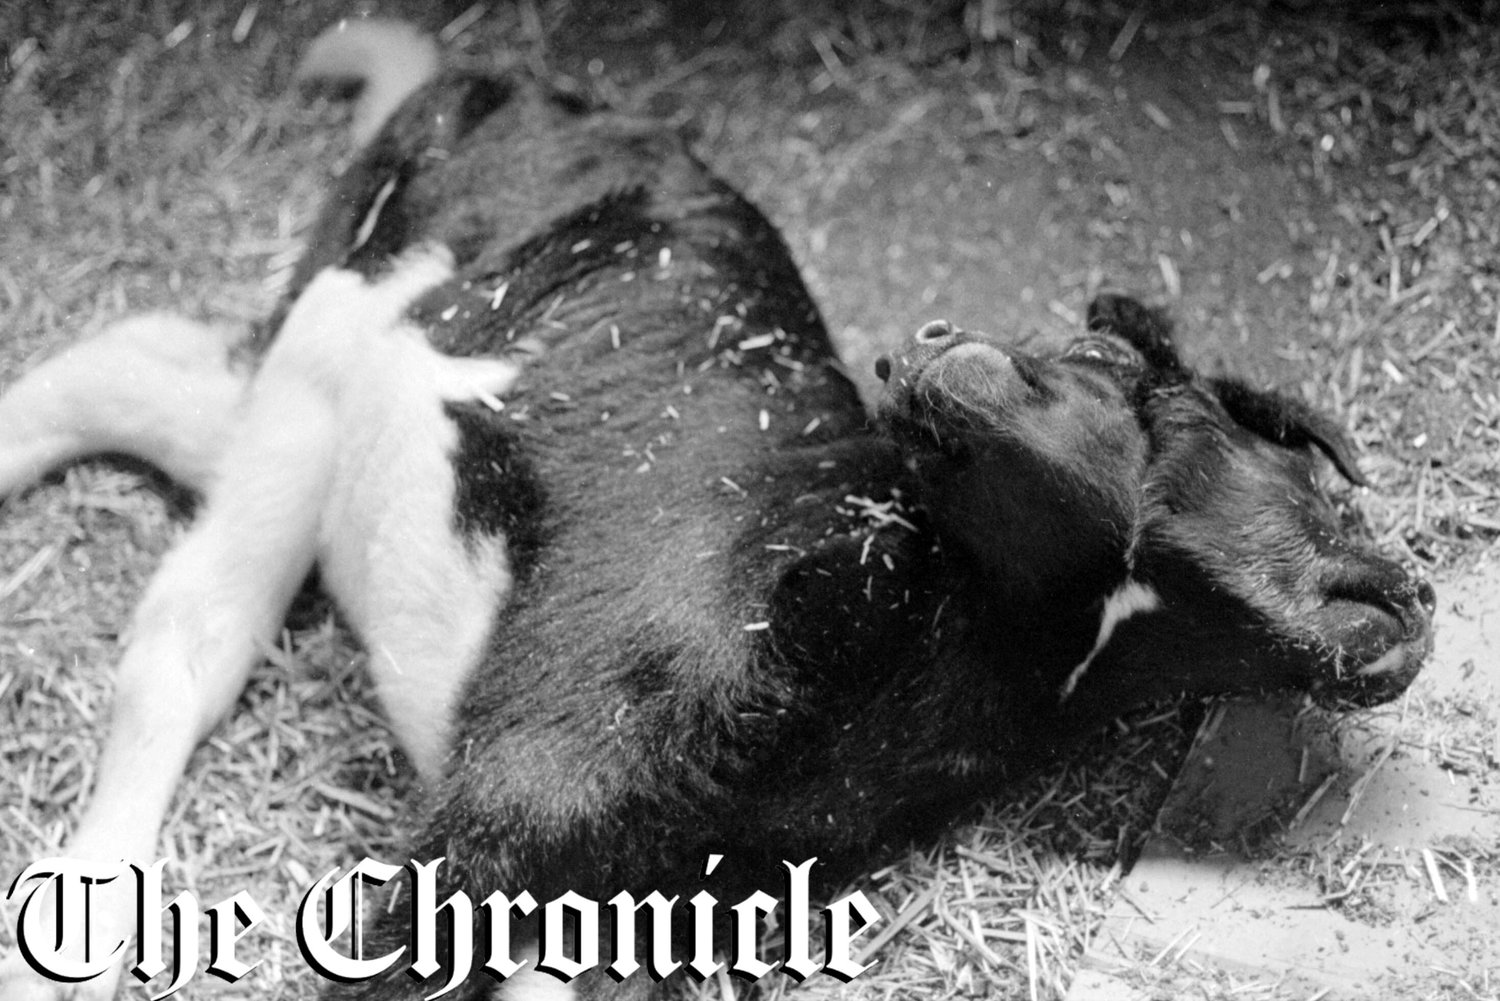 A two-headed calf born alive on August 12th, 1982, and was still living the next day. This calf was born at the Conrad Newman Holstein Farm near Littlerock, Washington.